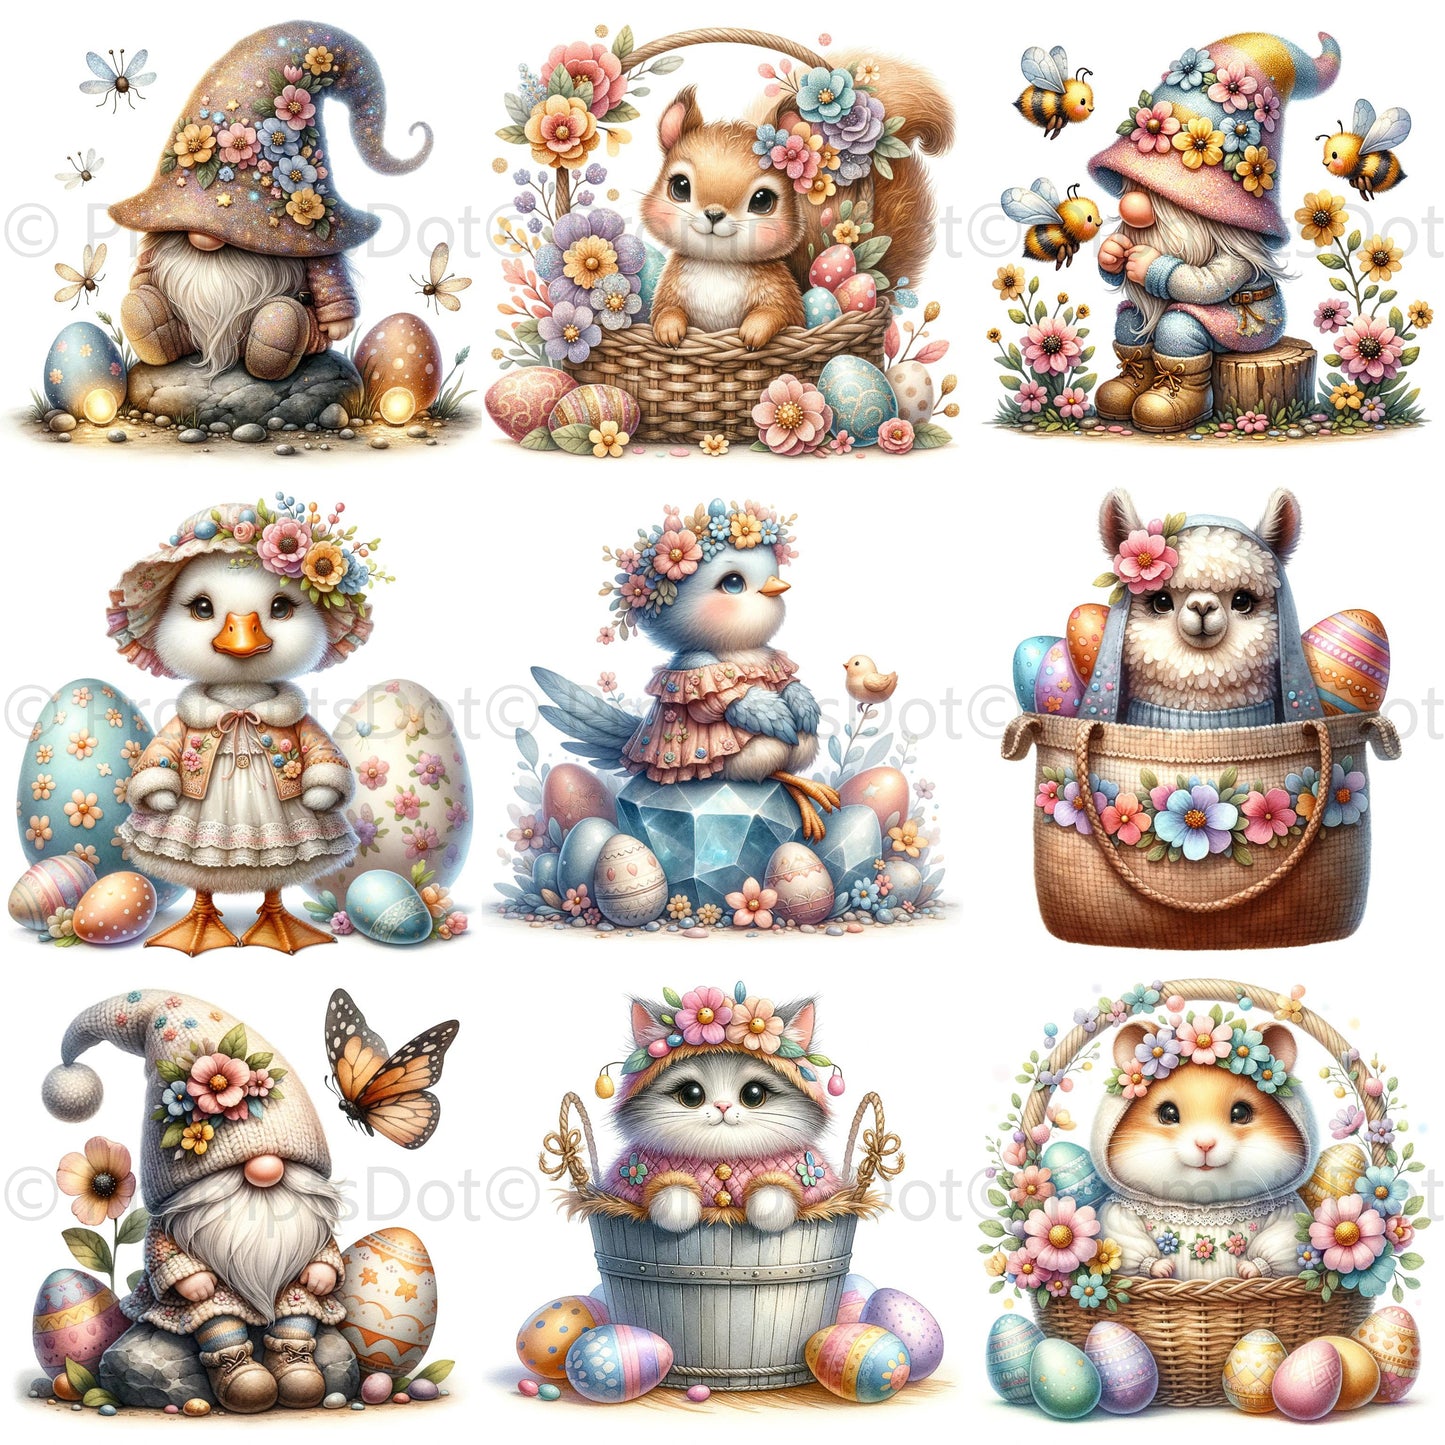 DALLE3 DALLE Prompt for Spring Gnomes Easter Cliparts